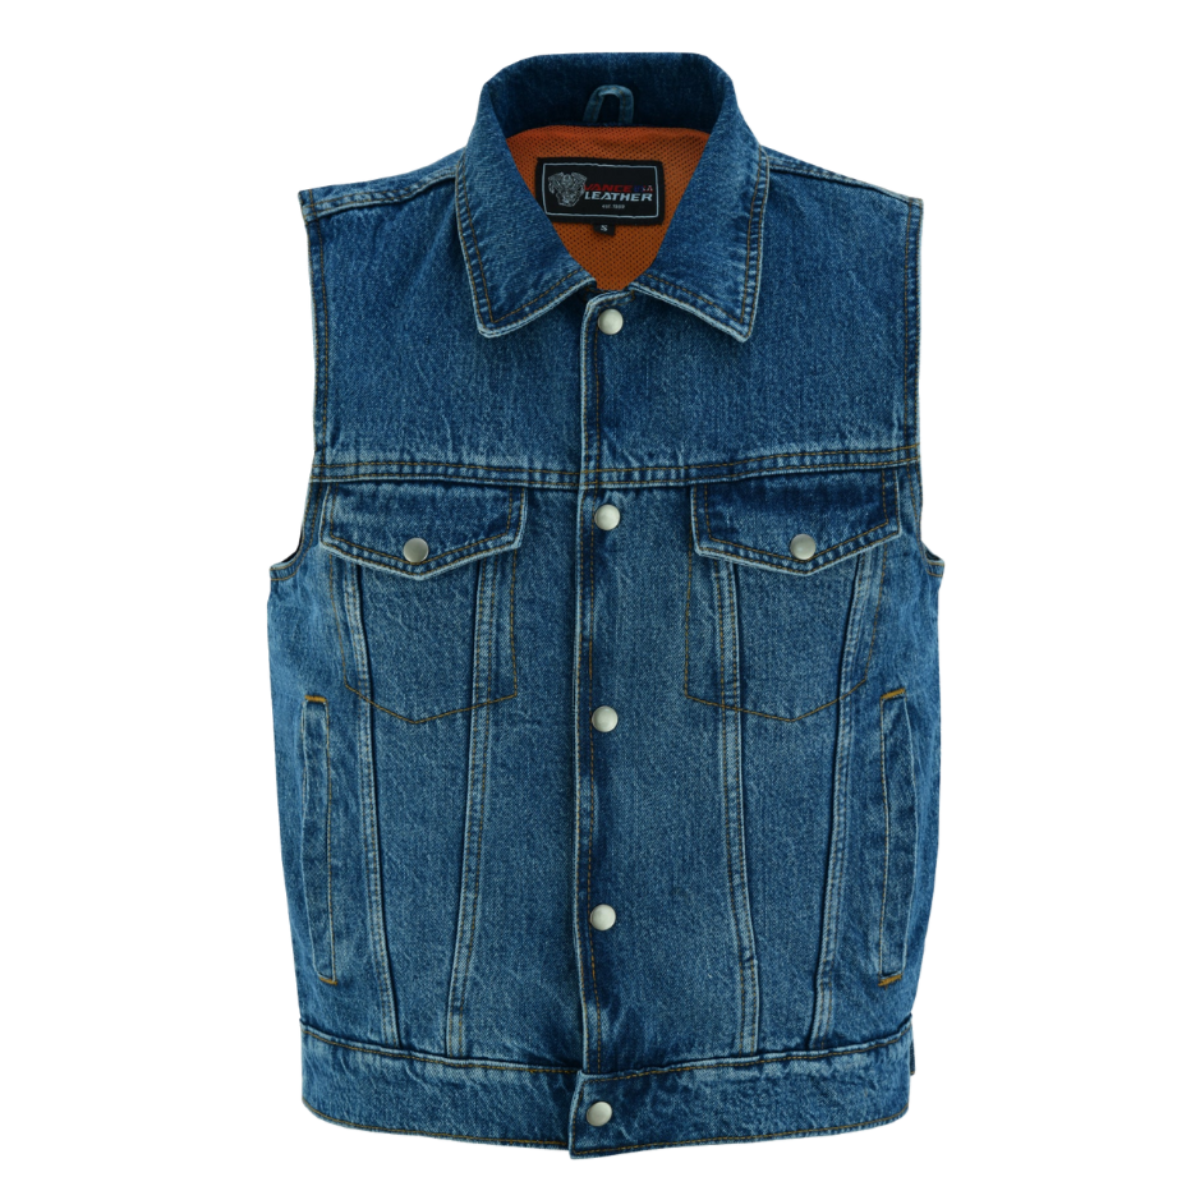 A Vance Leather Men's Denim Vest with Collar featuring 8 pockets and an adjustable bottom, photographed against a white background.